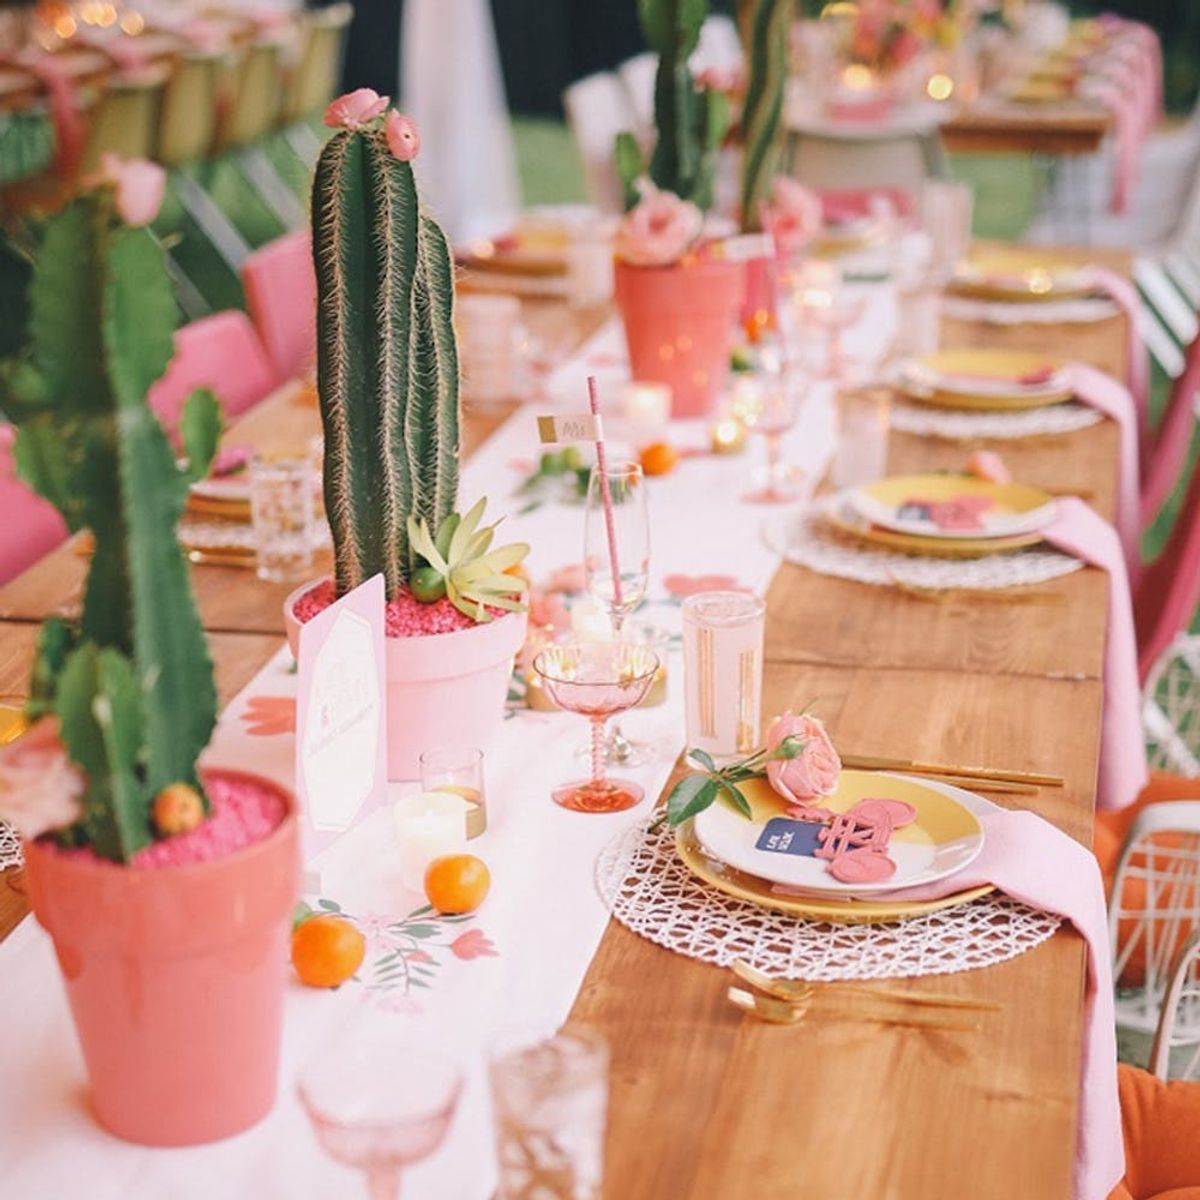 13 Southwestern Bridal Shower Ideas for the Cactus-Obsessed Gal